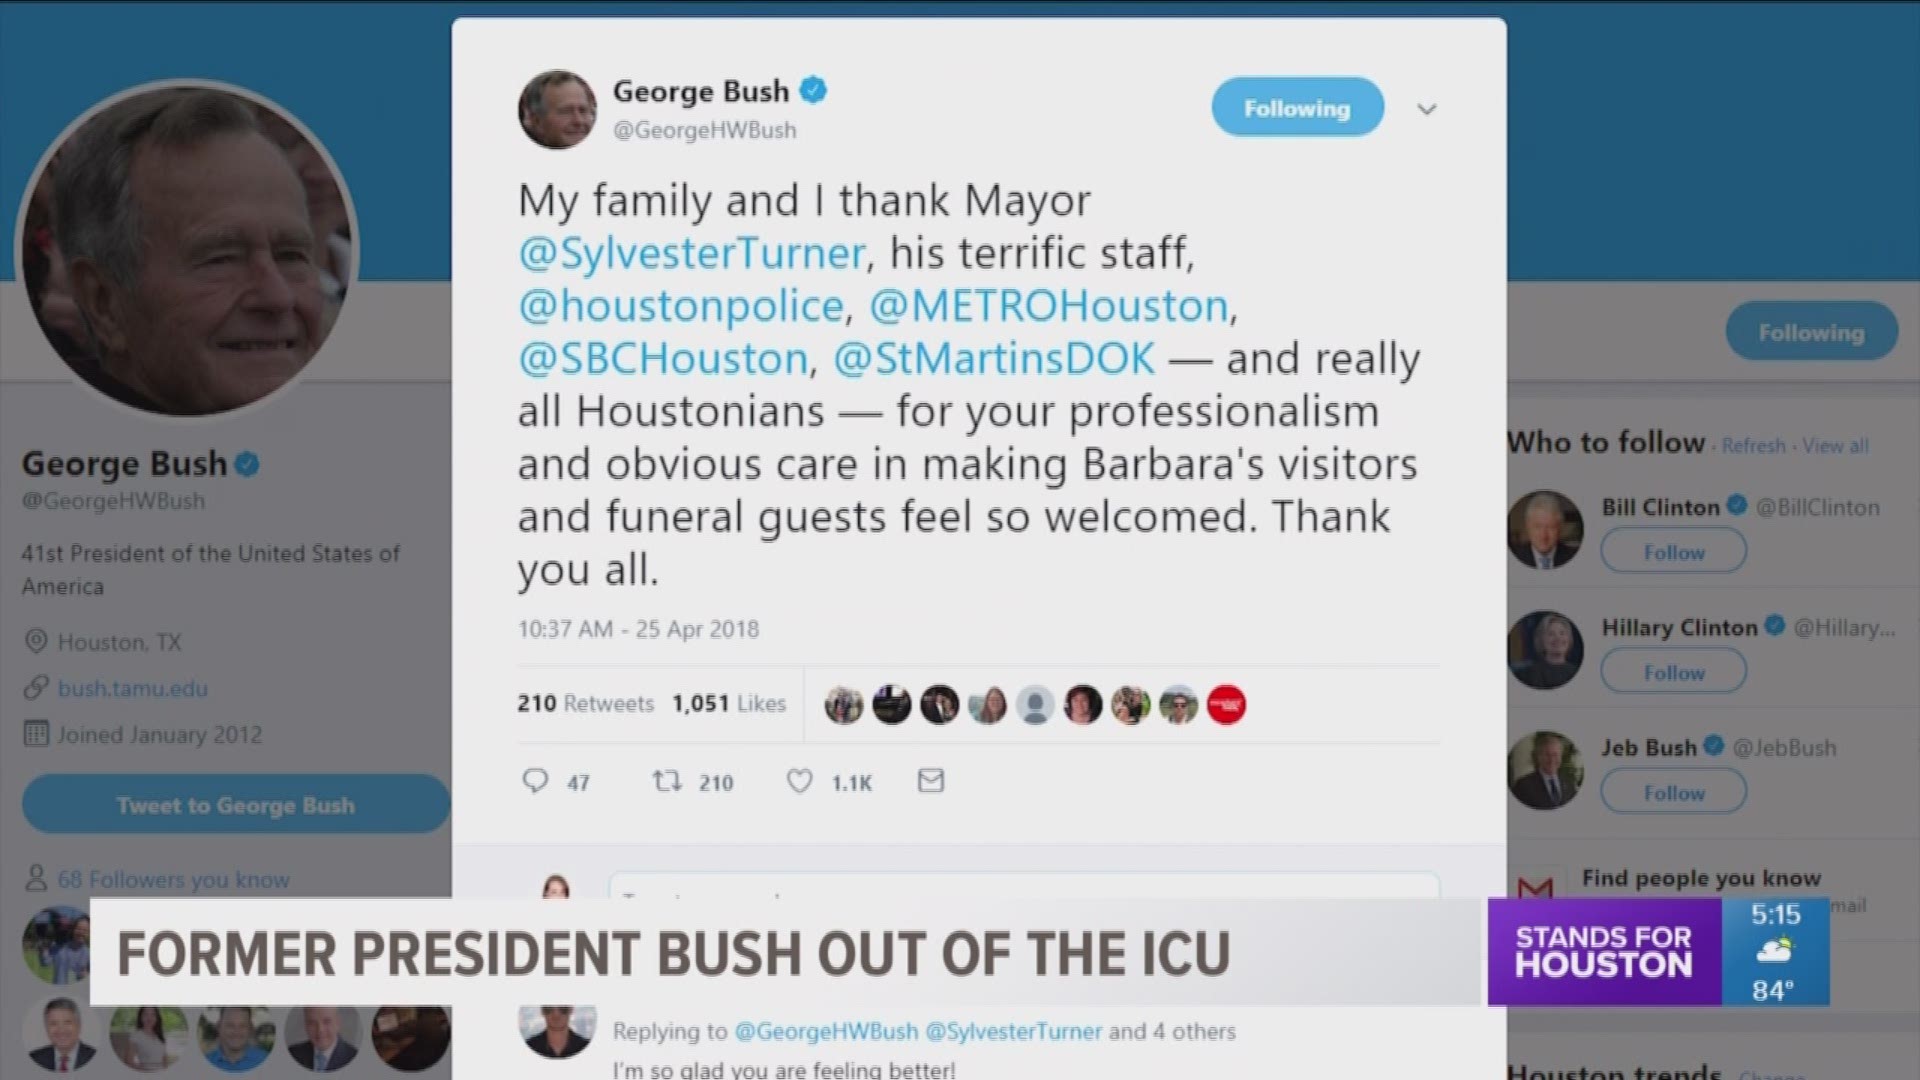 A spokesman for George H.W. Bush provided an update on the former President's health Wednesday afternoon.